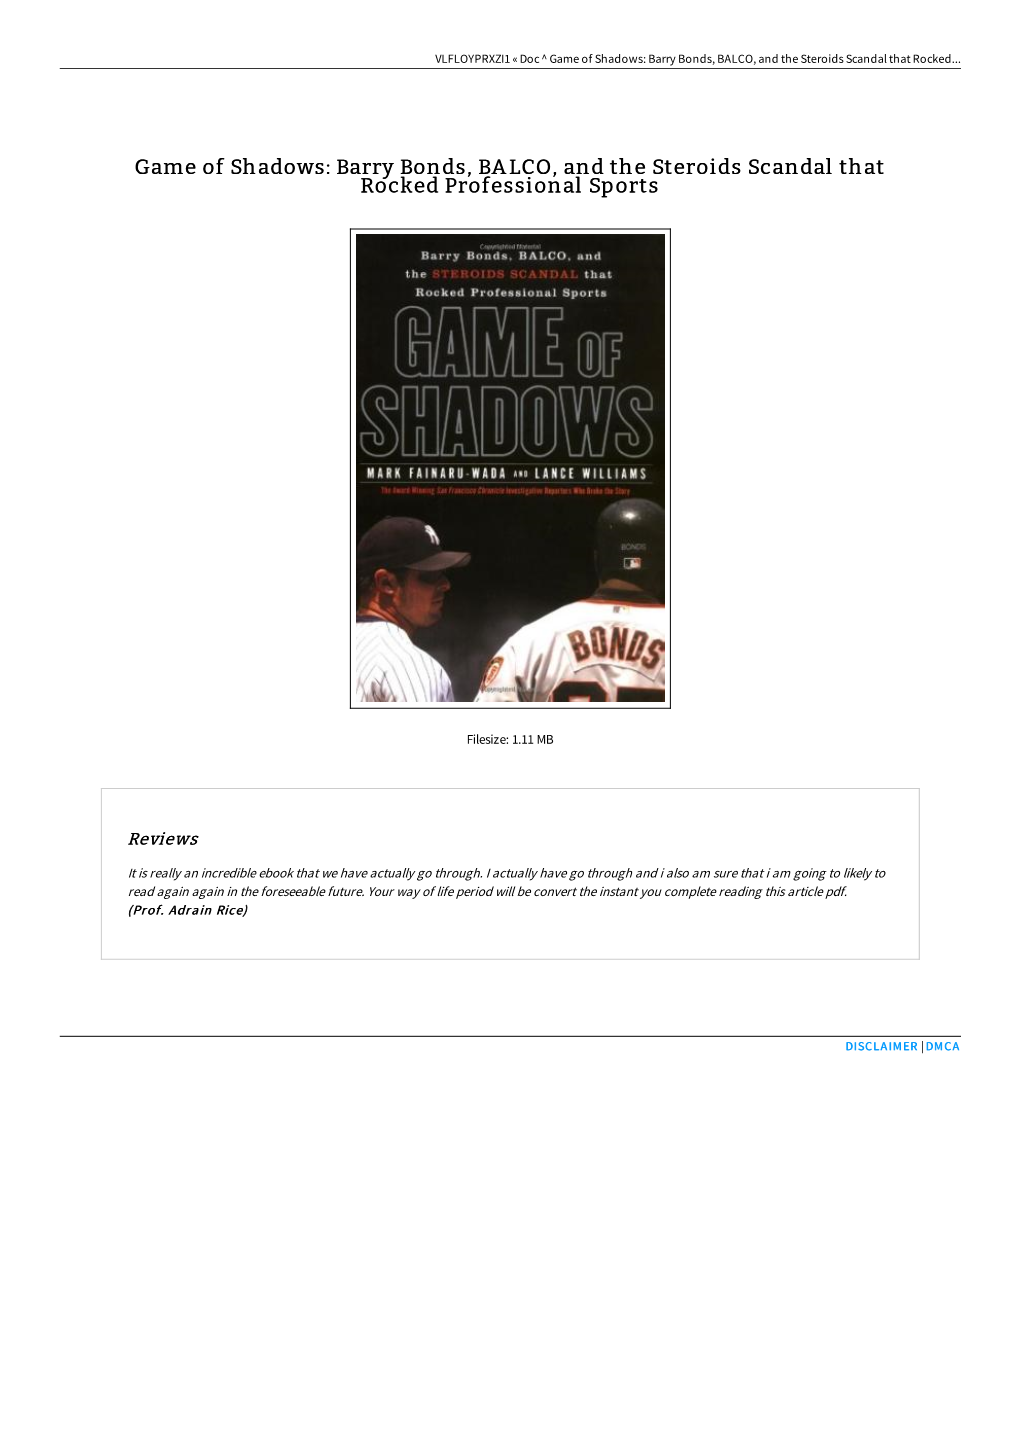 Game of Shadows: Barry Bonds, BALCO, and the Steroids Scandal That Rocked